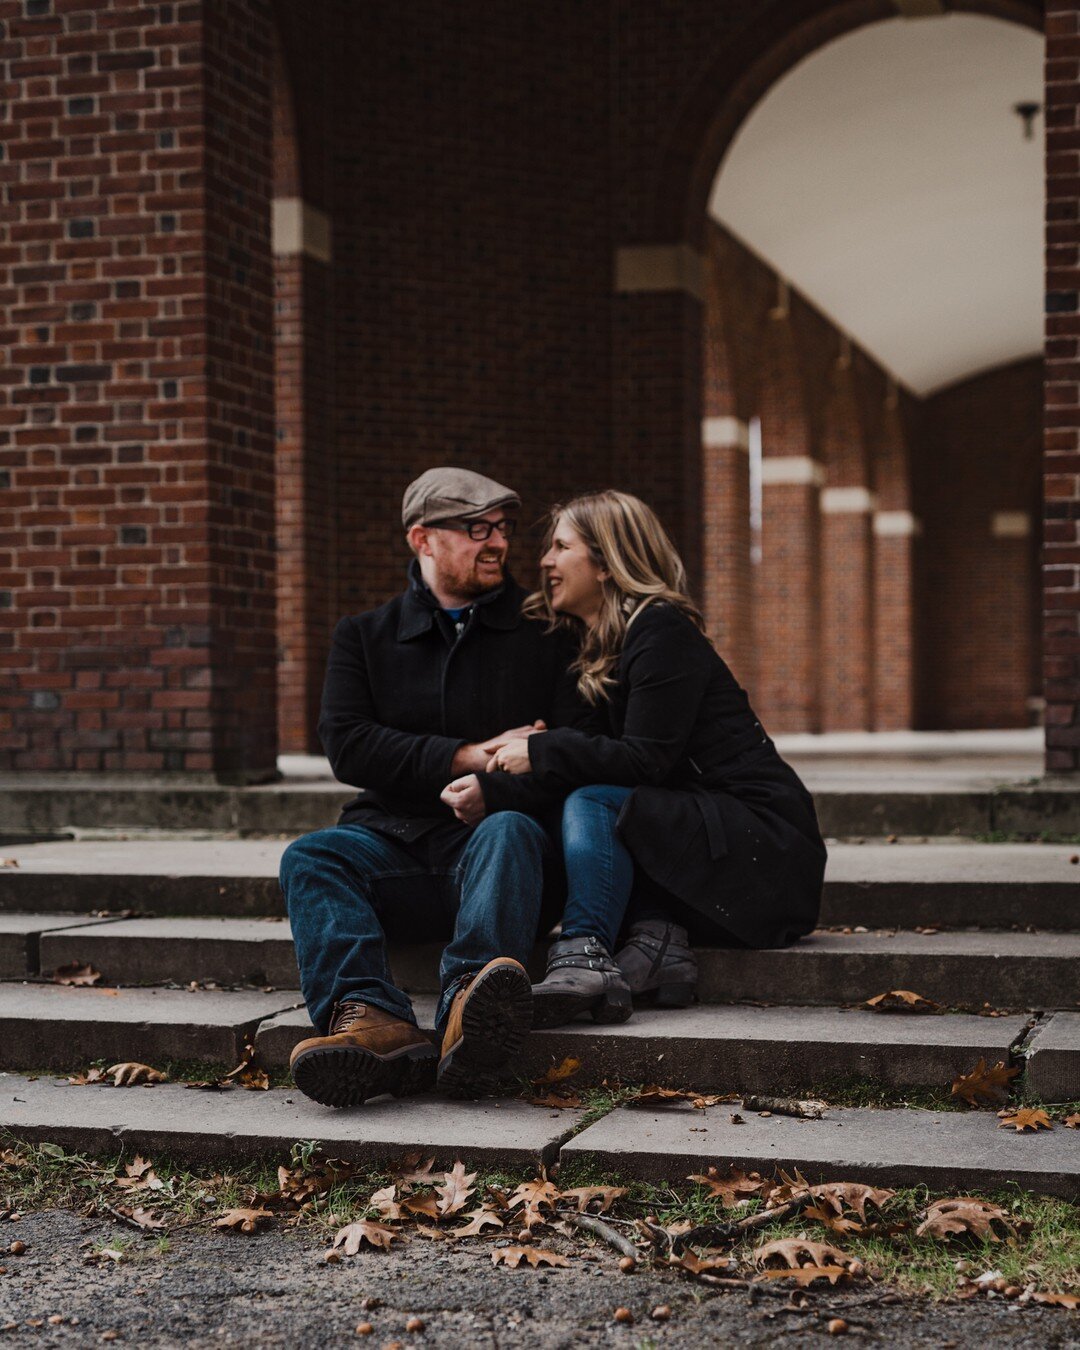 we love a good staircase in front of a good archway with a good couple sitting on it 🍂⠀⠀⠀⠀⠀⠀⠀⠀⠀
.⠀⠀⠀⠀⠀⠀⠀⠀⠀
.⠀⠀⠀⠀⠀⠀⠀⠀⠀
.⠀⠀⠀⠀⠀⠀⠀⠀⠀
.⠀⠀⠀⠀⠀⠀⠀⠀⠀
.⠀⠀⠀⠀⠀⠀⠀⠀⠀
.⠀⠀⠀⠀⠀⠀⠀⠀⠀
#planoly  #portrait #coupleportrait #portraitphotographer #upstateny #upstatenyphotogra